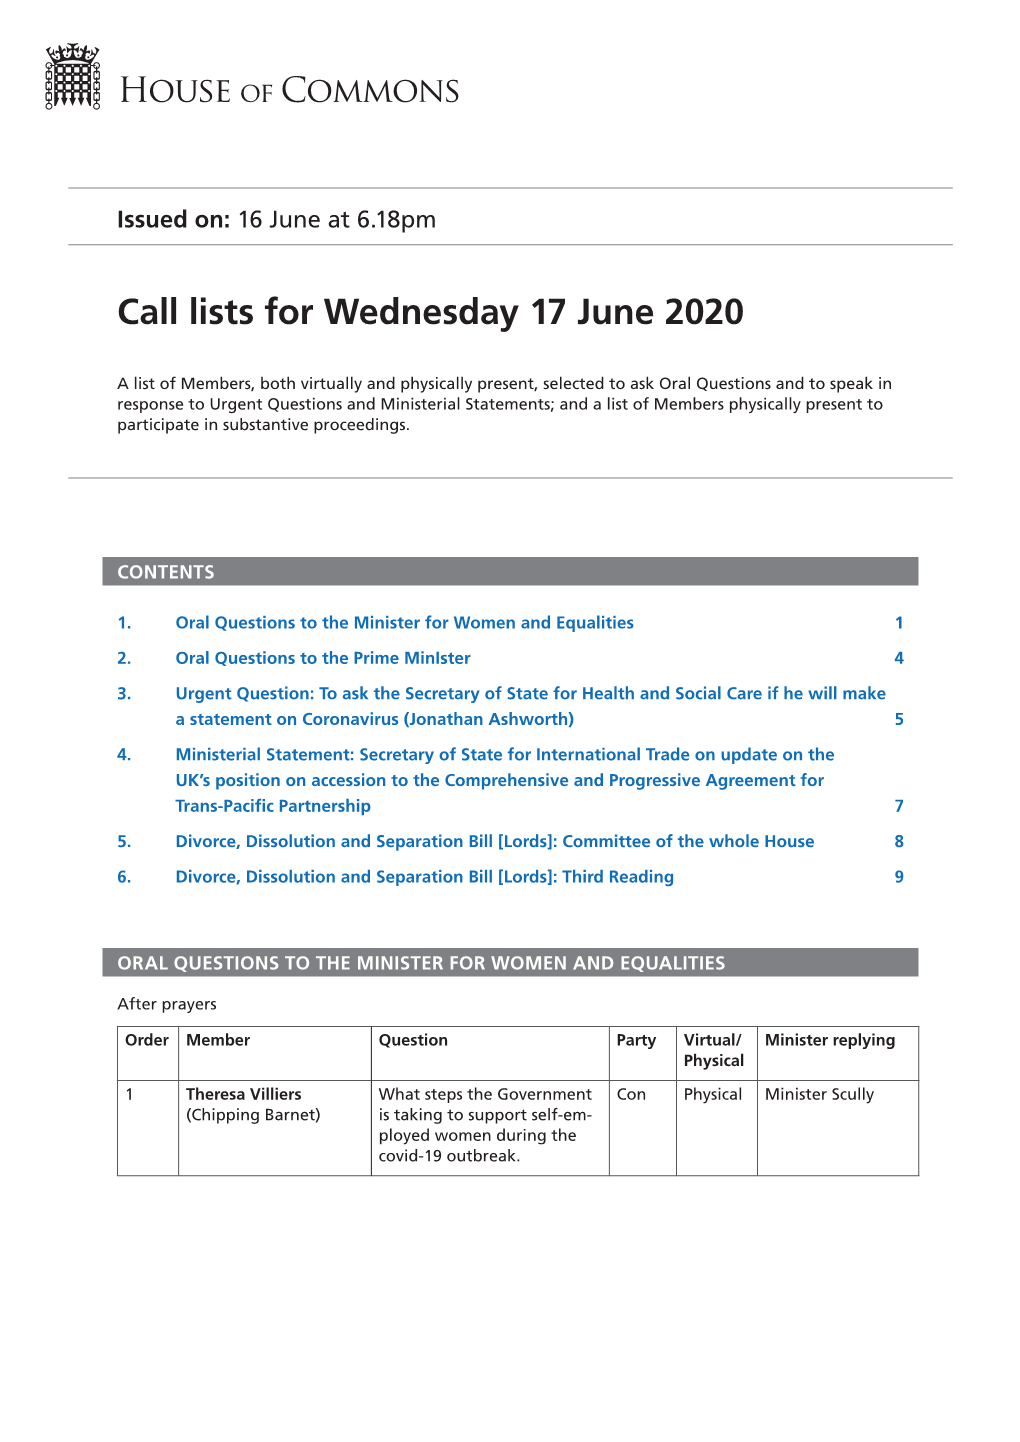 Call List for Wed 17 Jun 2020